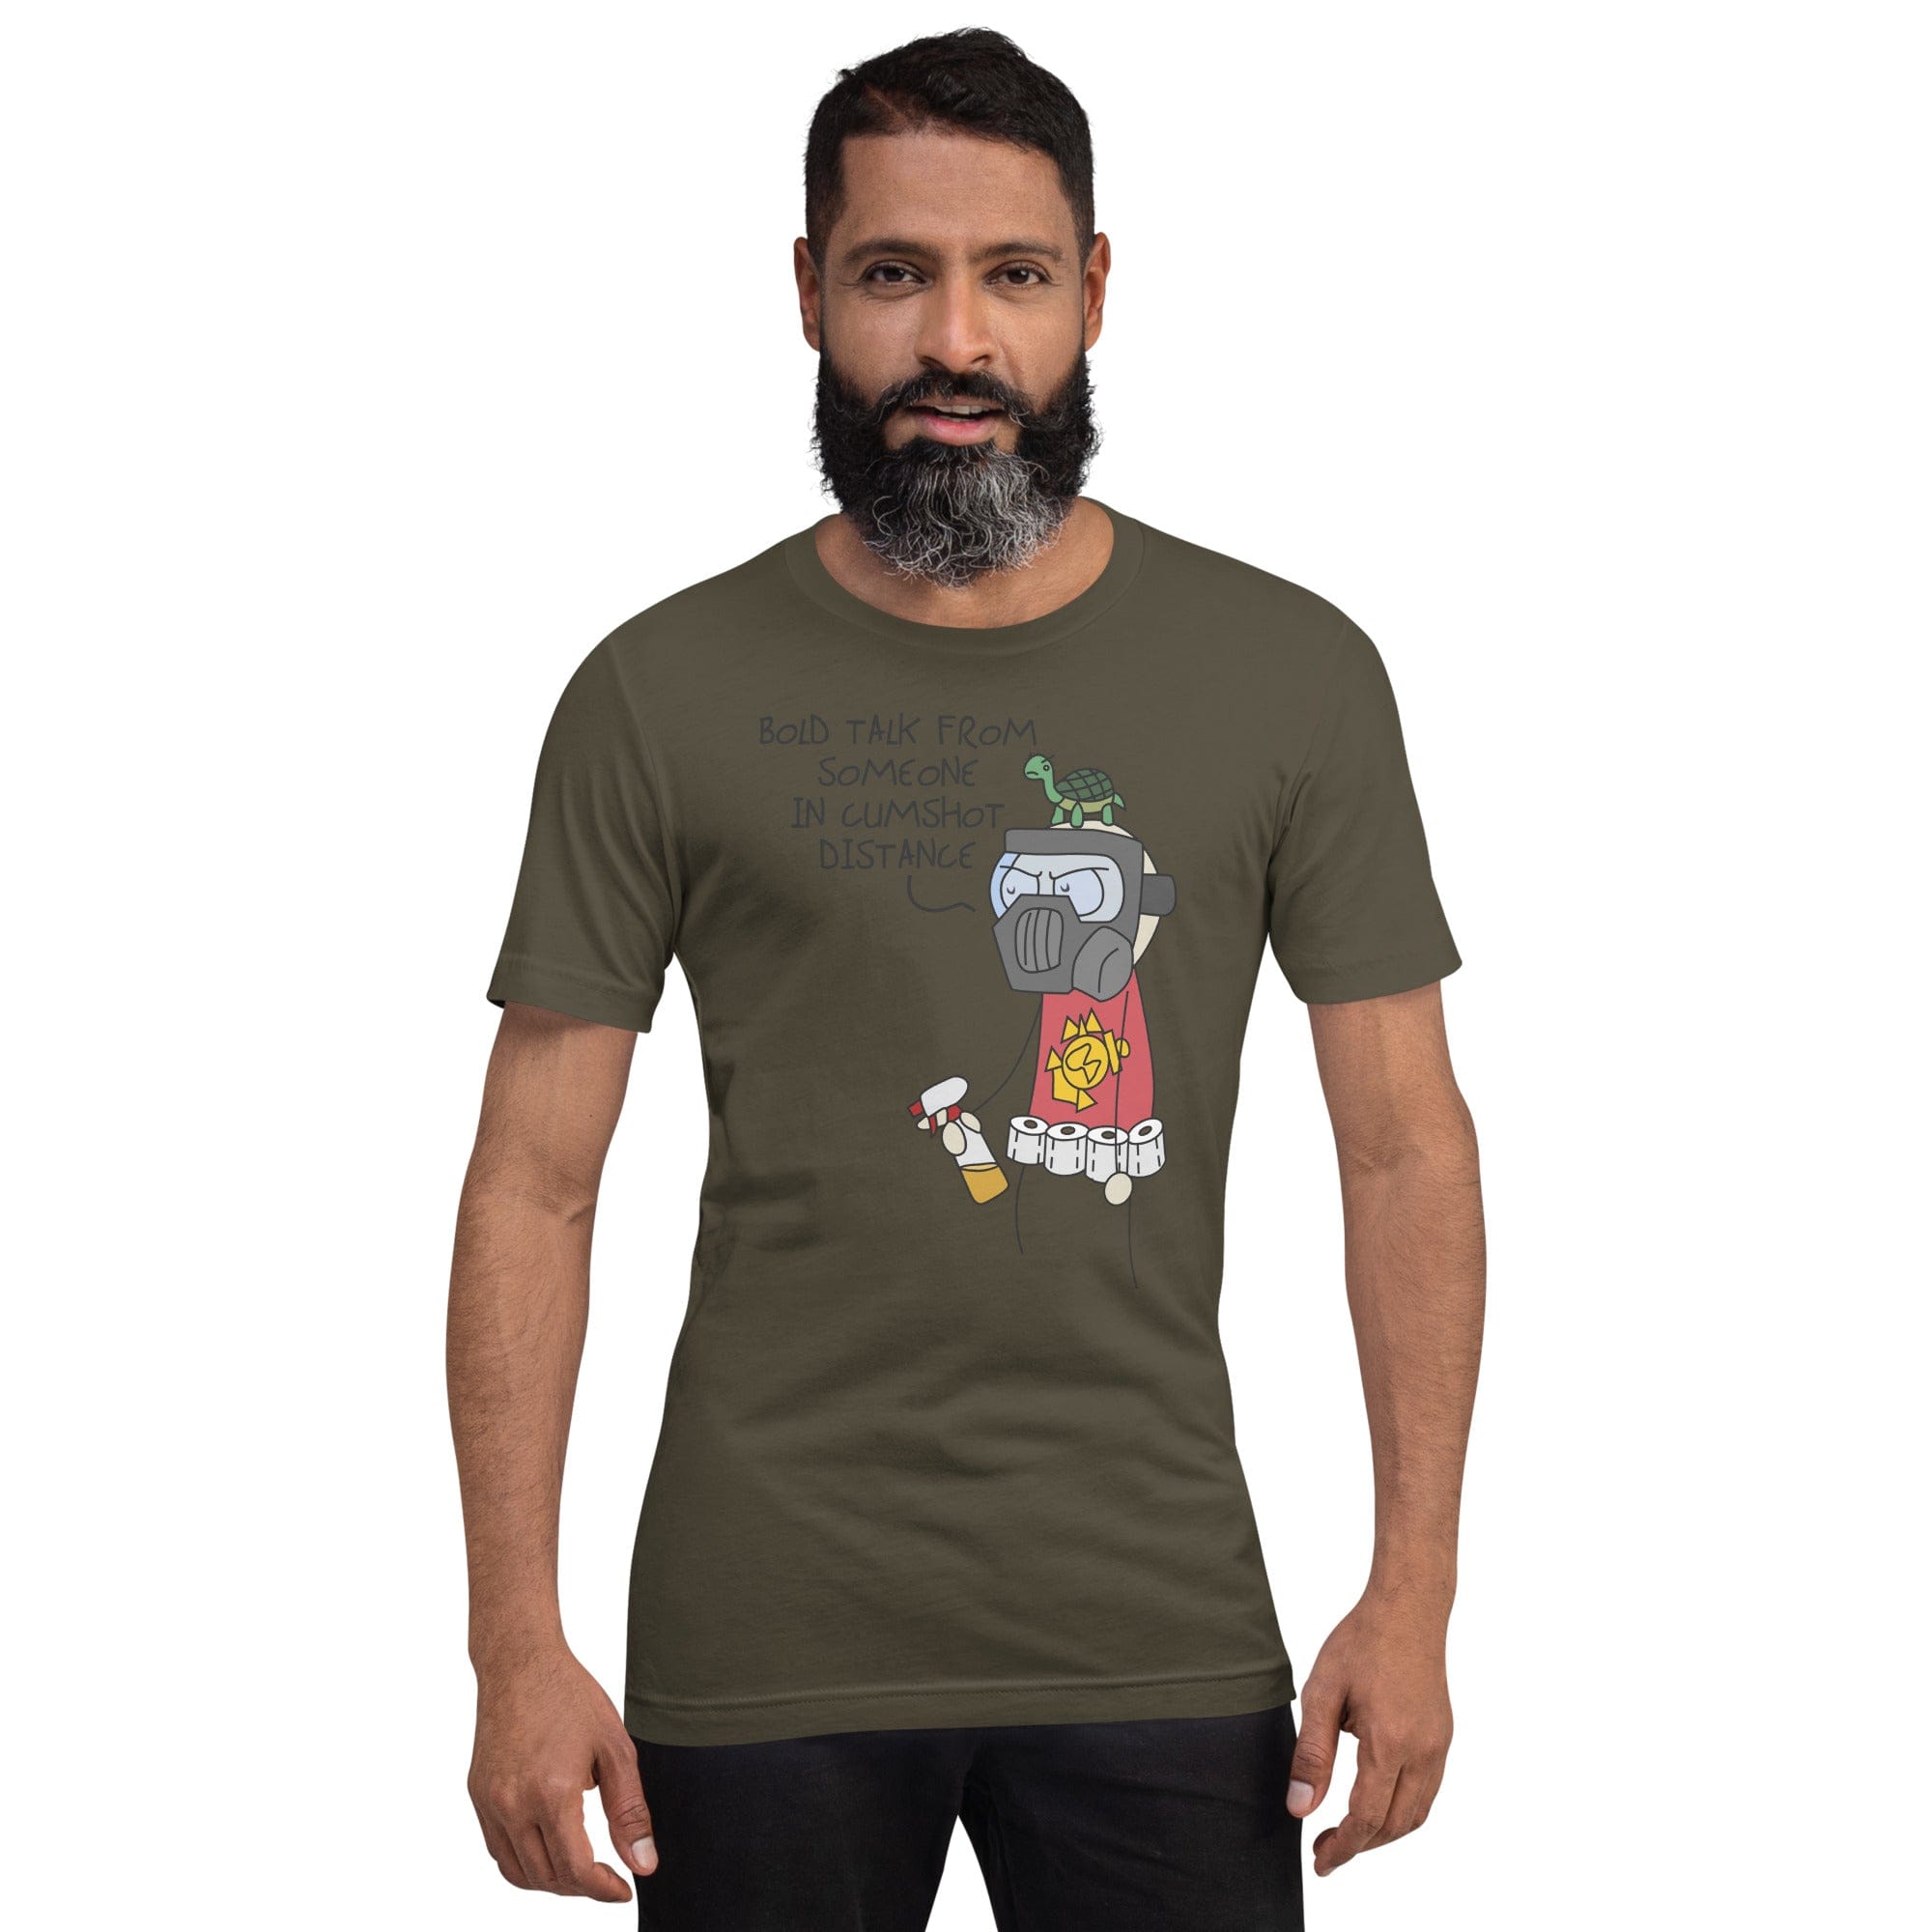 Tactical Gear Junkie Army / S Sketch's World © Officially Licensed - Cumshot Distance Marine Unisex T-Shirt